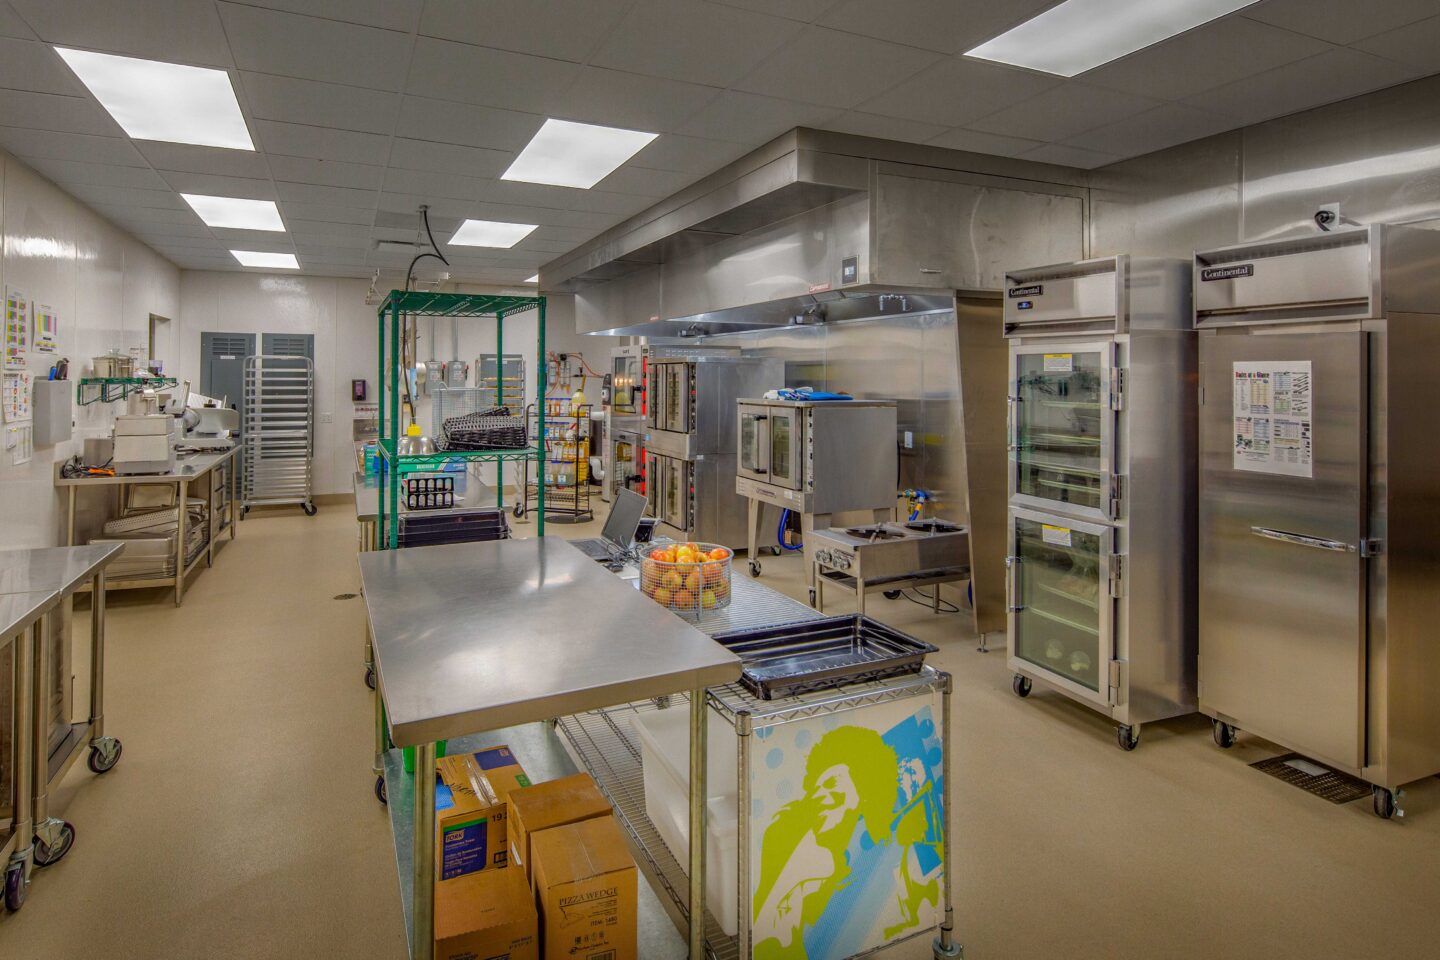 A large, well-equipped commercial kitchen at Waukesha North High School